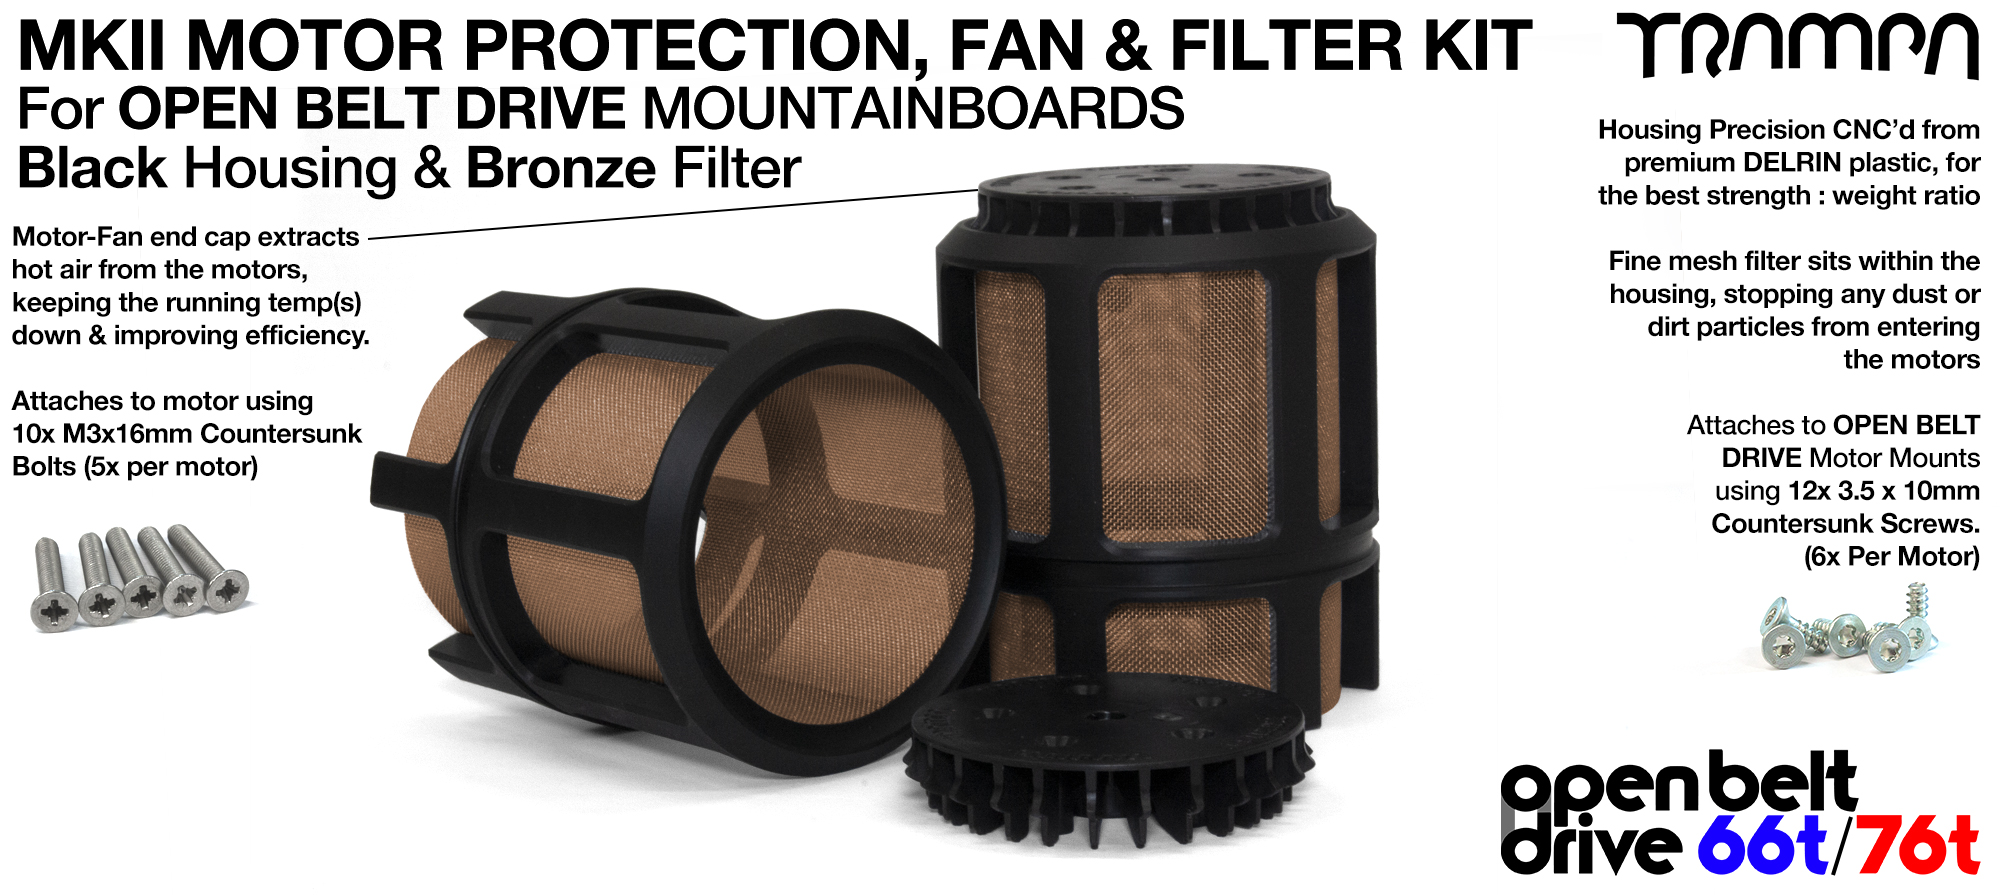 2x OBD MKII Motor protection Sleeve BLACK with BRONZE Filter